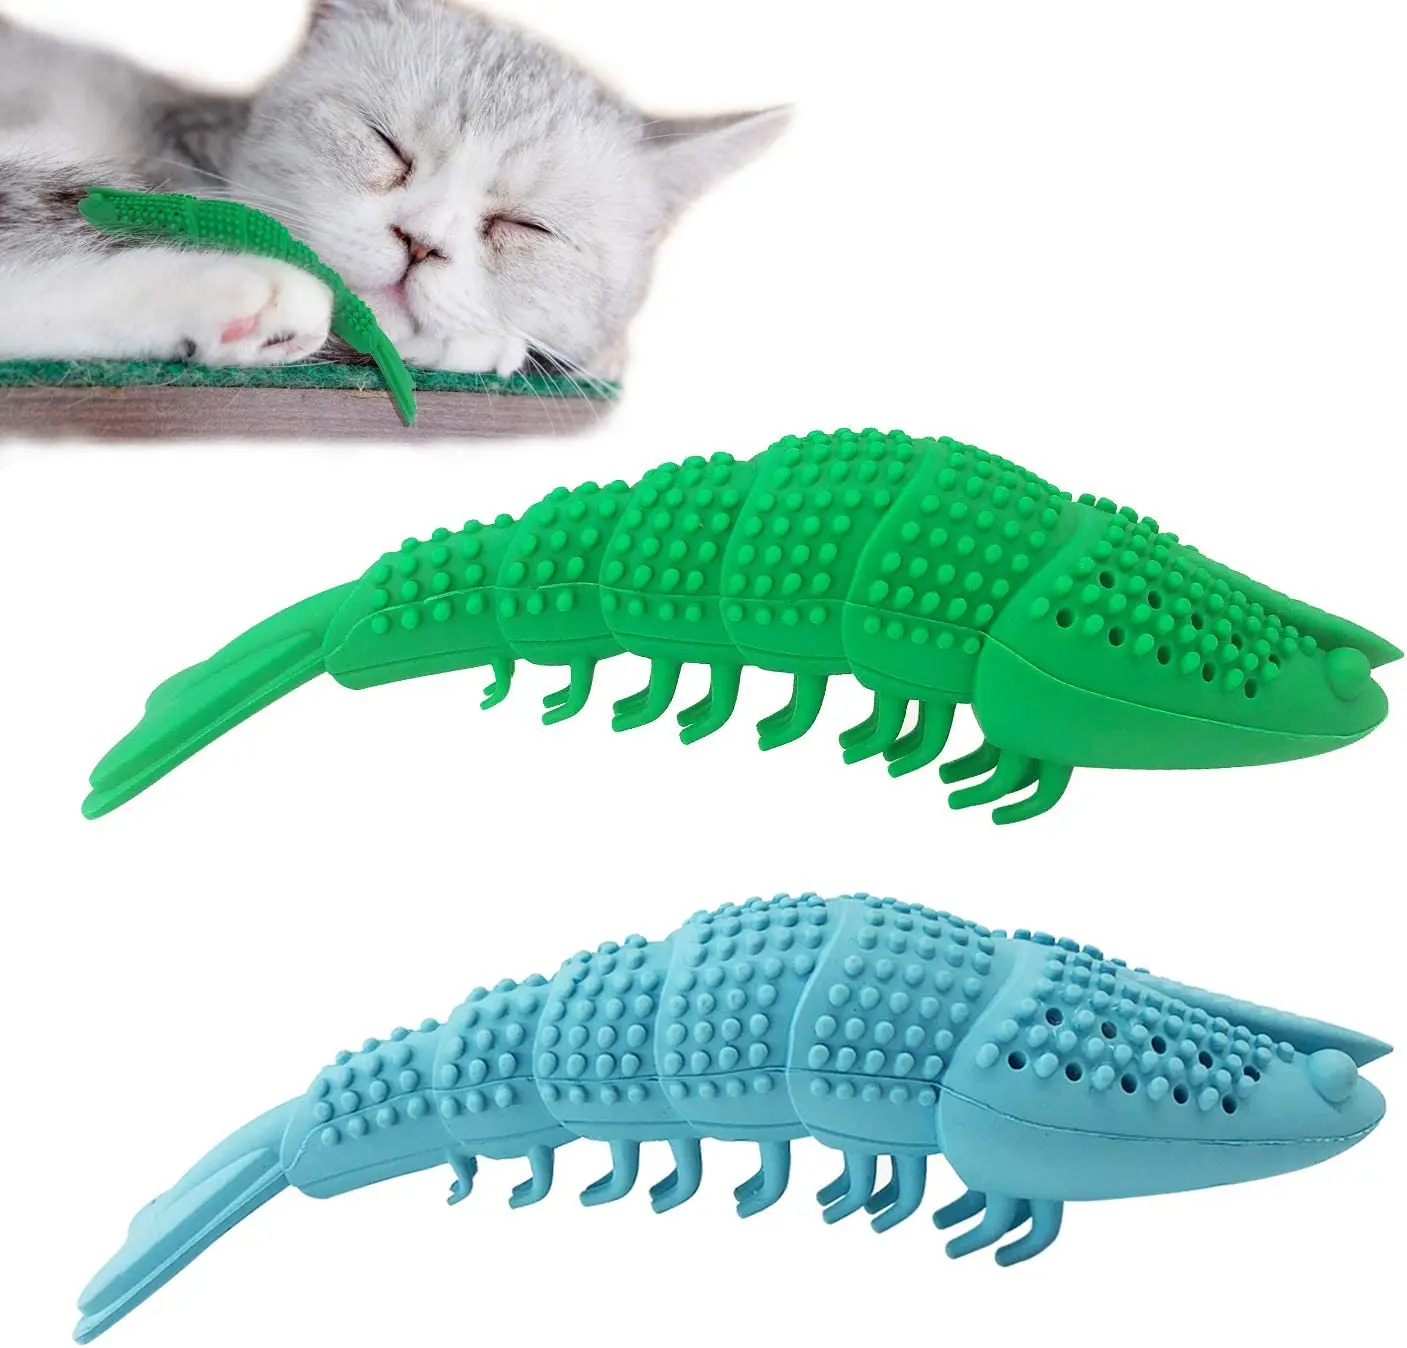 

ATUBAN Cat Toothbrush Catnip Toy,Interactive Rubber Dental Care for Pet Kitten,Crayfish-Shaped Safe Chewing Durable Cat Toys